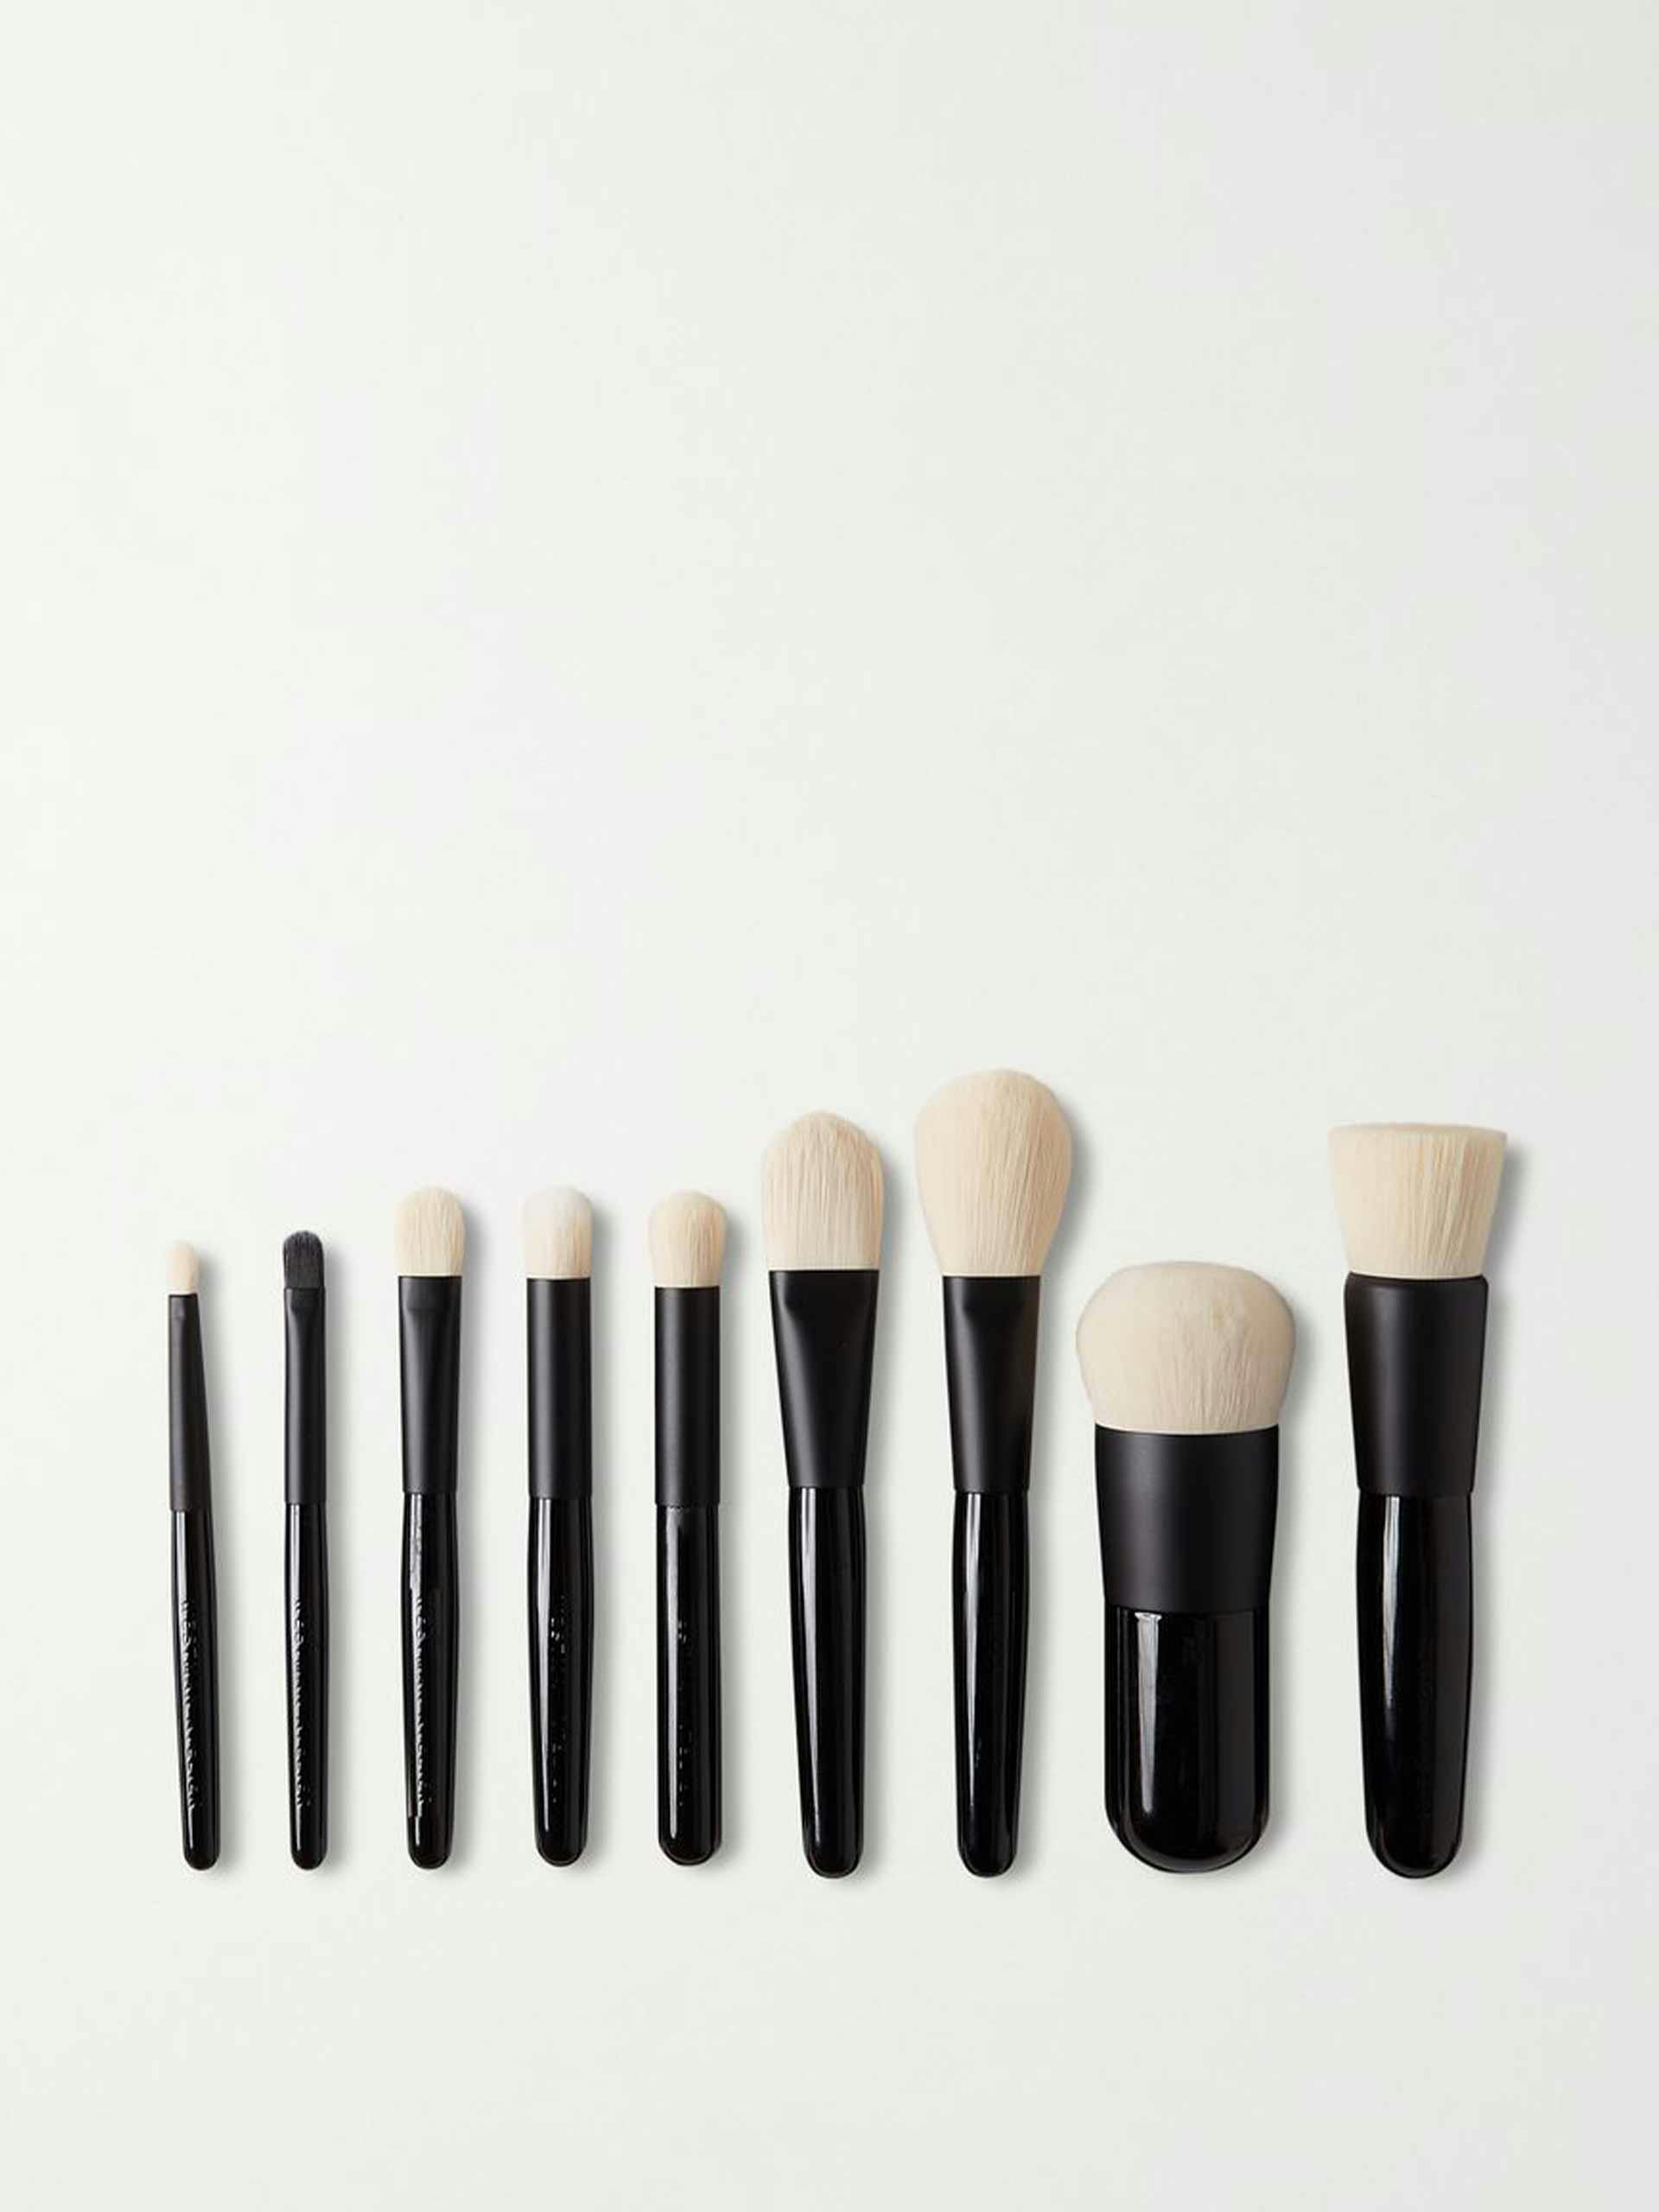 The brush collection